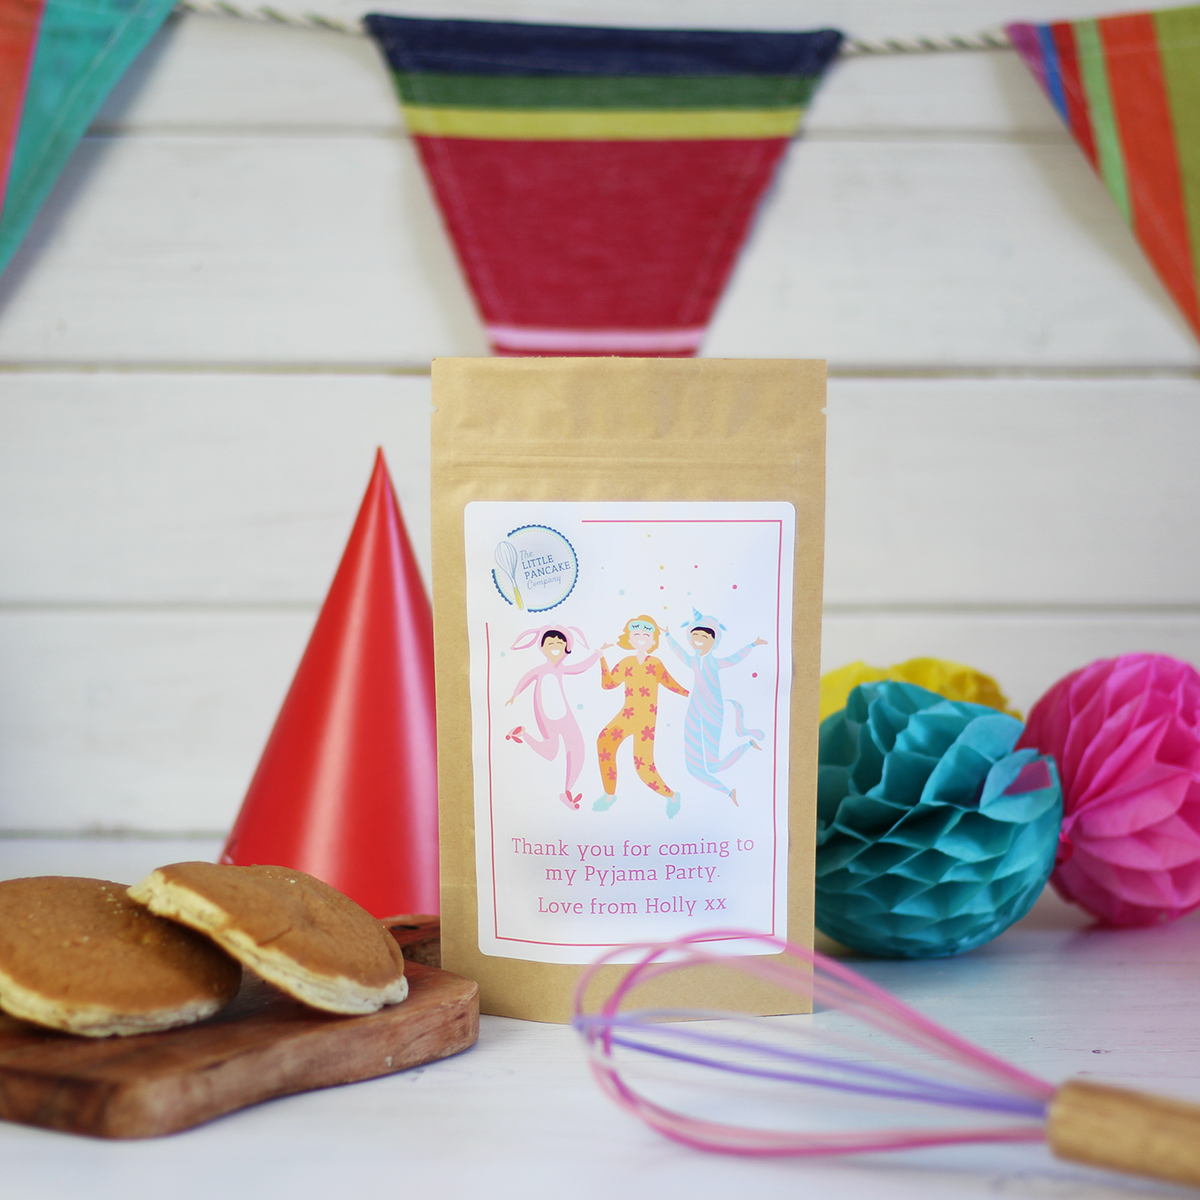 Pancake - Pancake The Bags Personalised Company Party Little Sleepover Mix